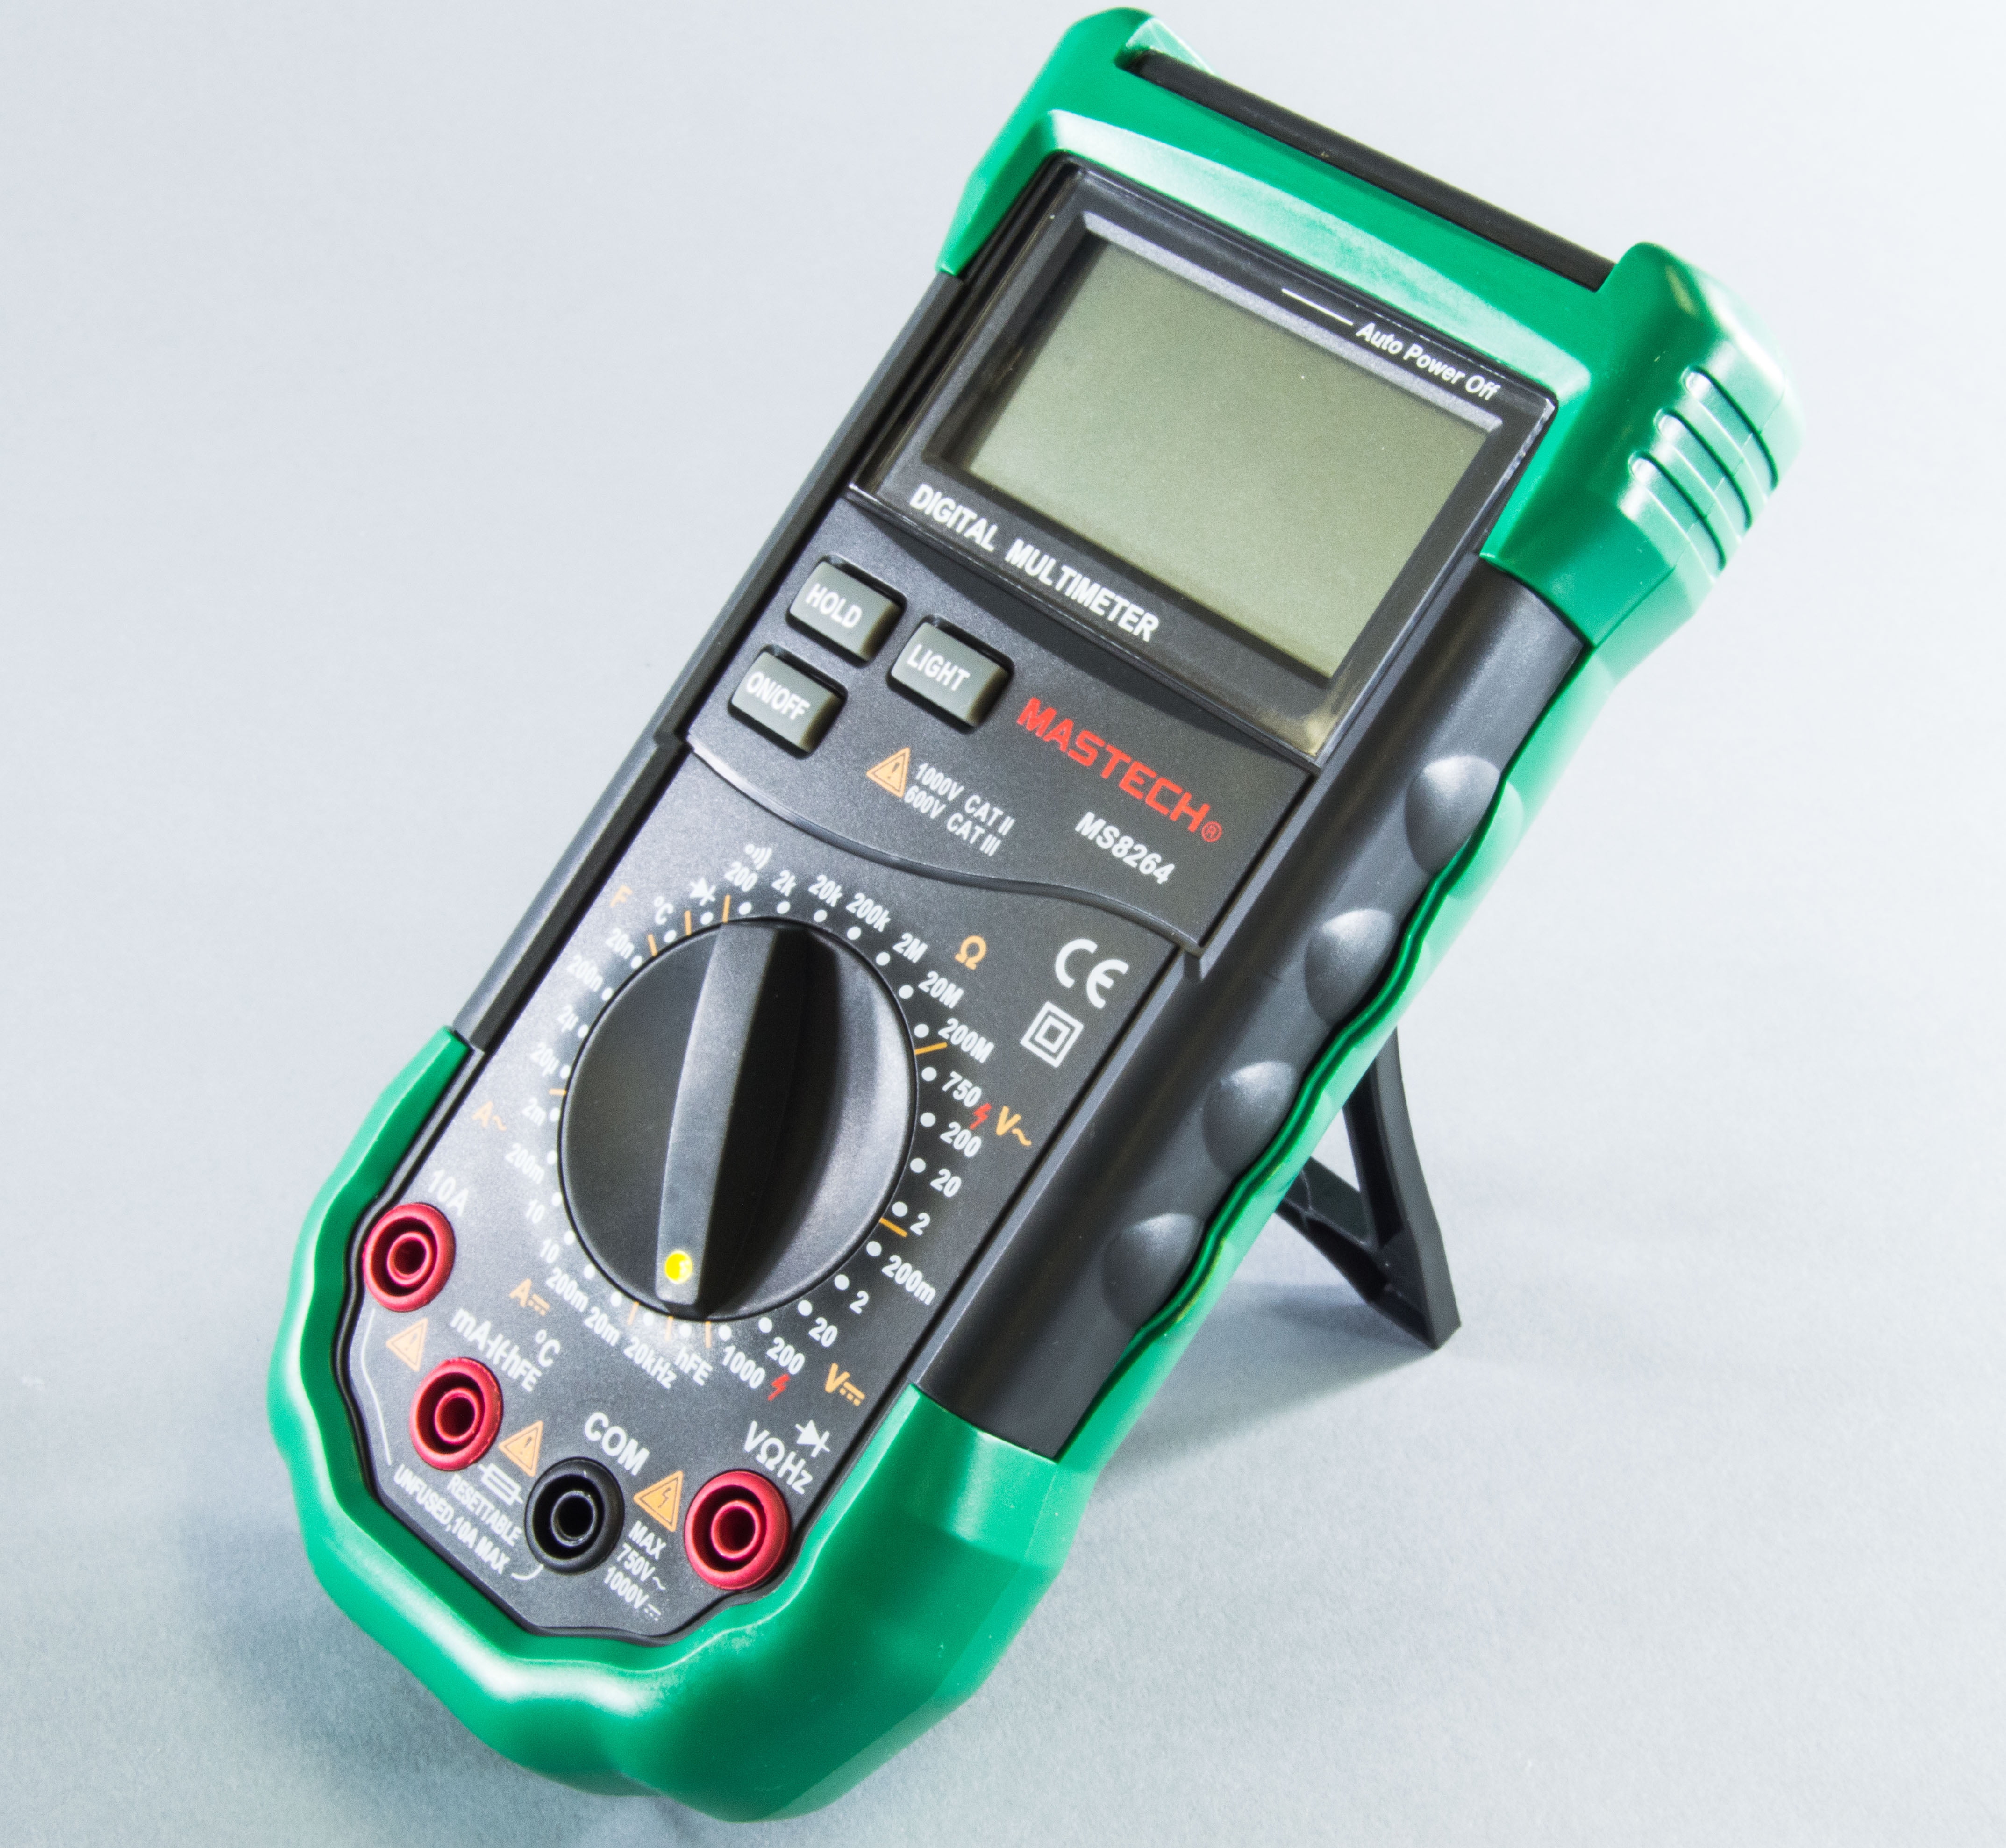 Mastech MS8261 Full Feartured Digital Multimeter with Temperature and Capacitance Measurement 